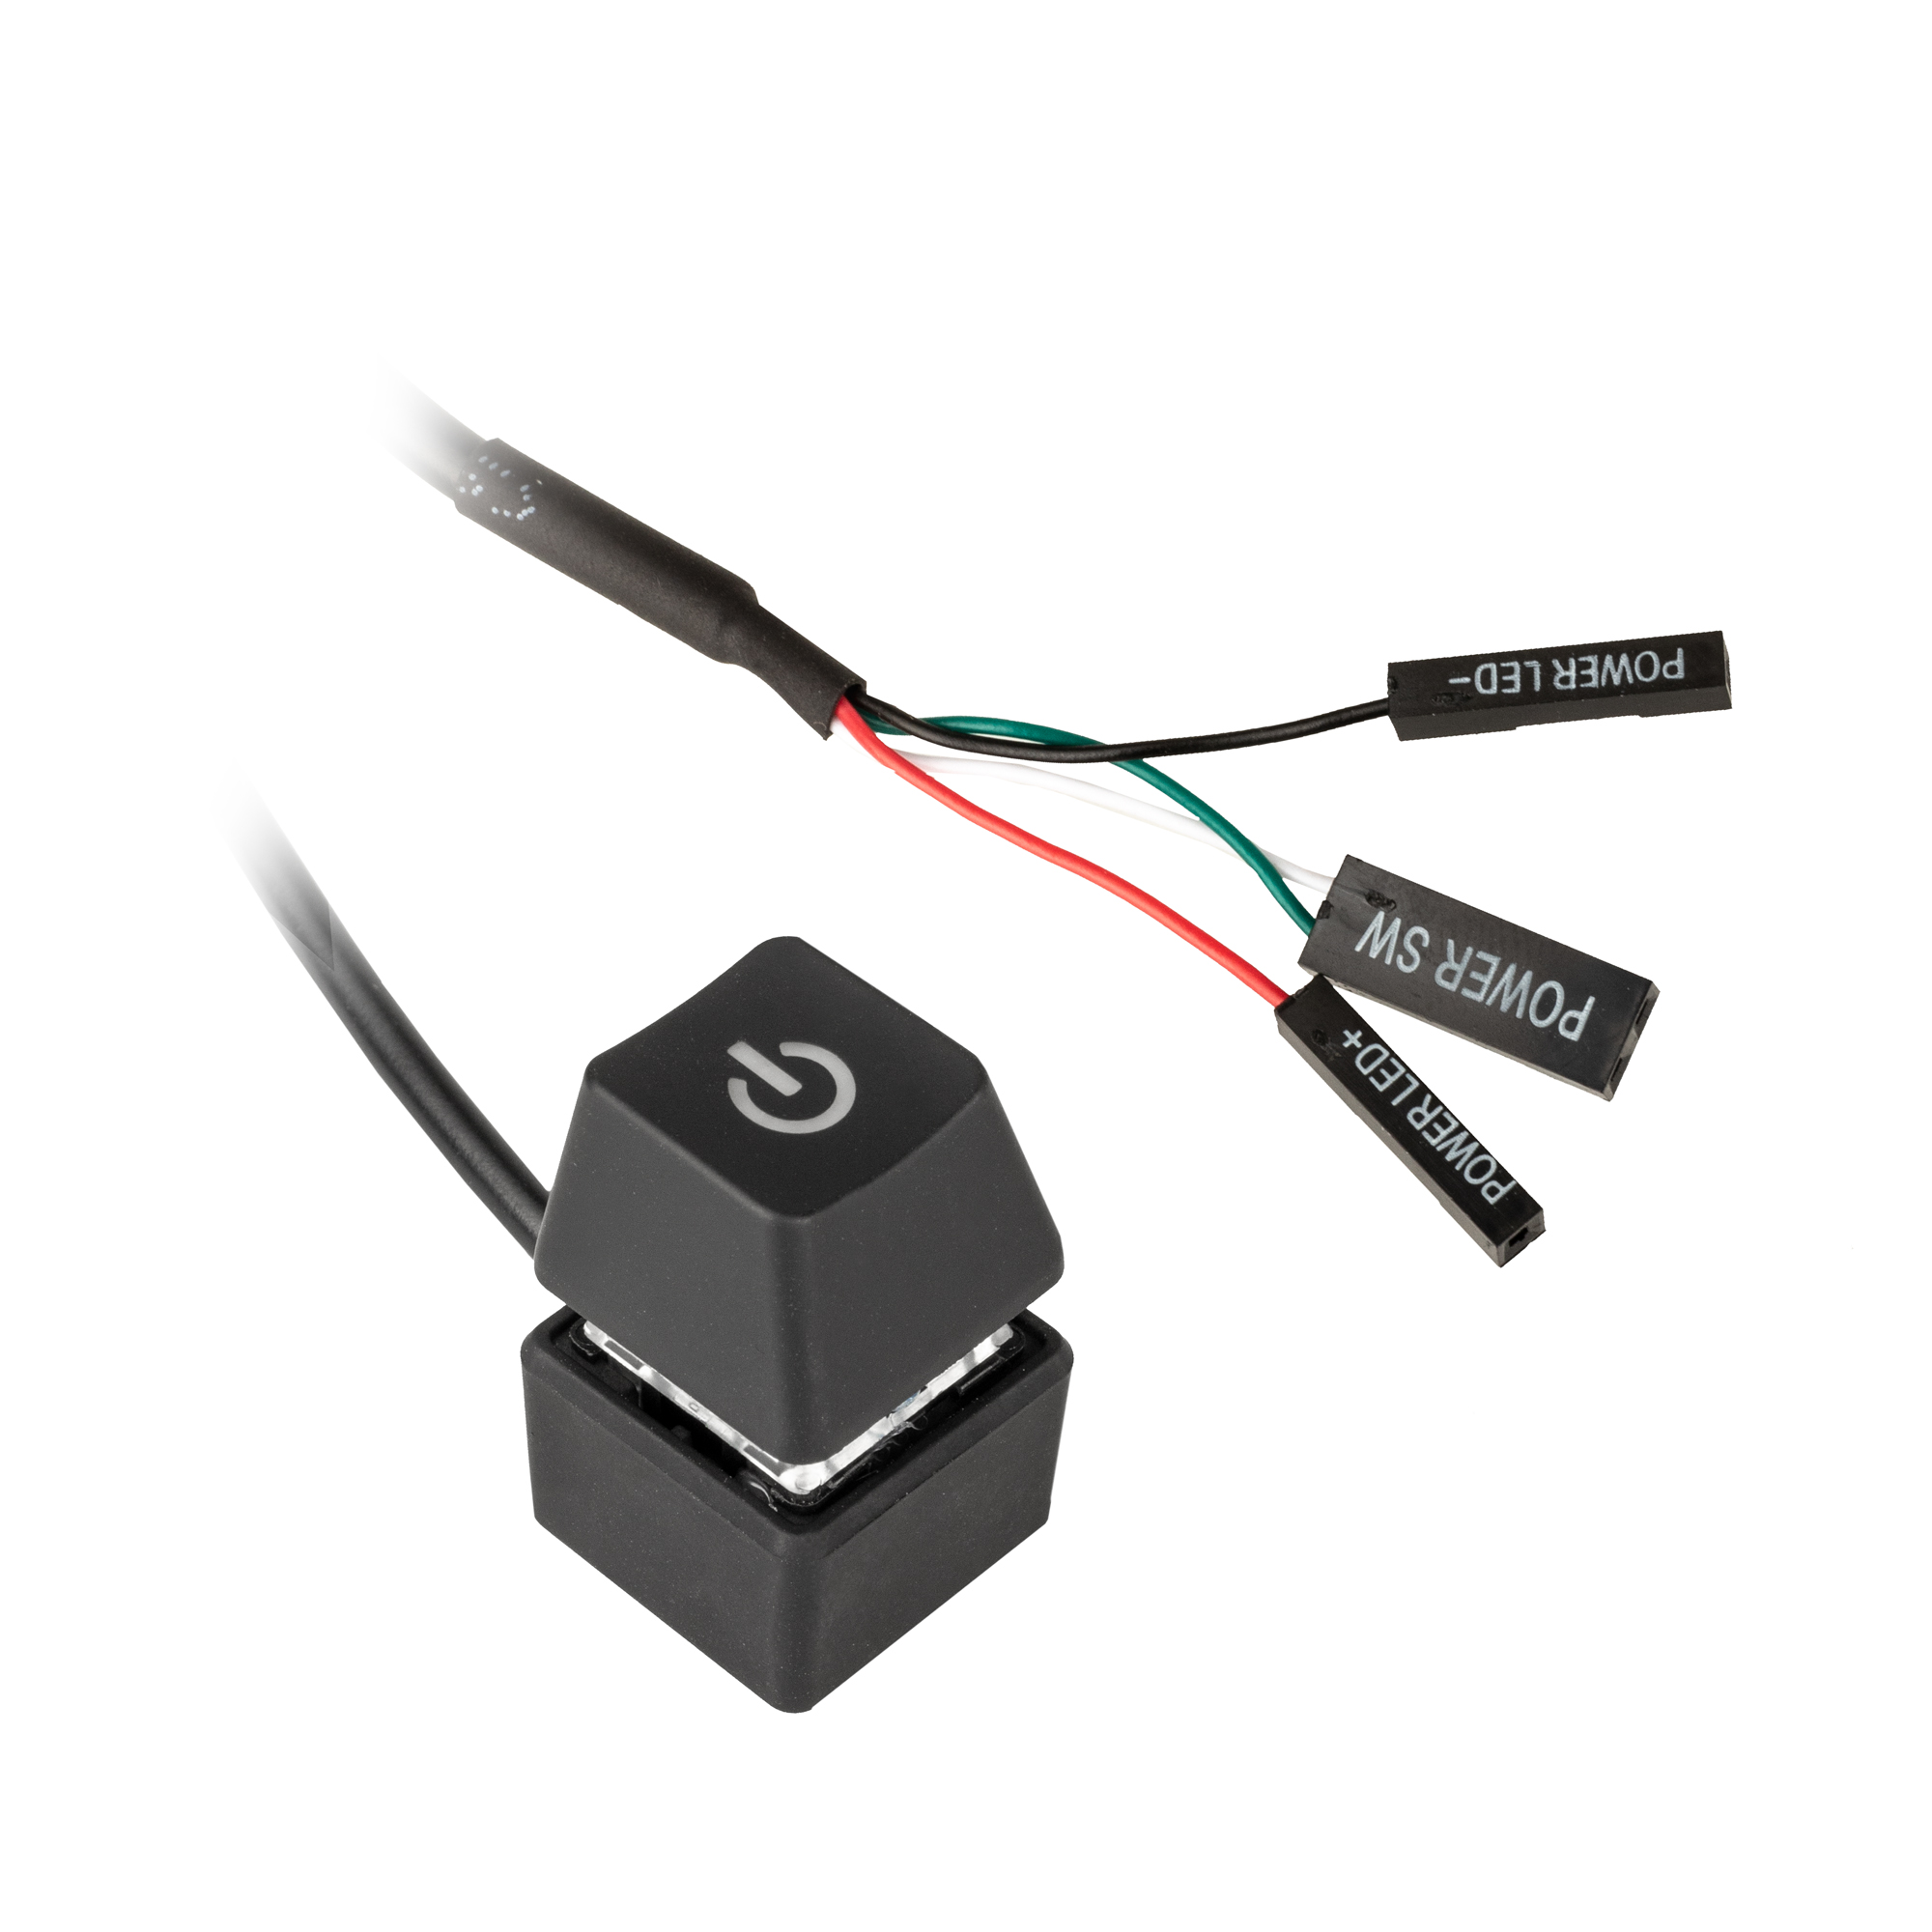 PC Power & Reset Buttons – Available Now at Overclockers UK